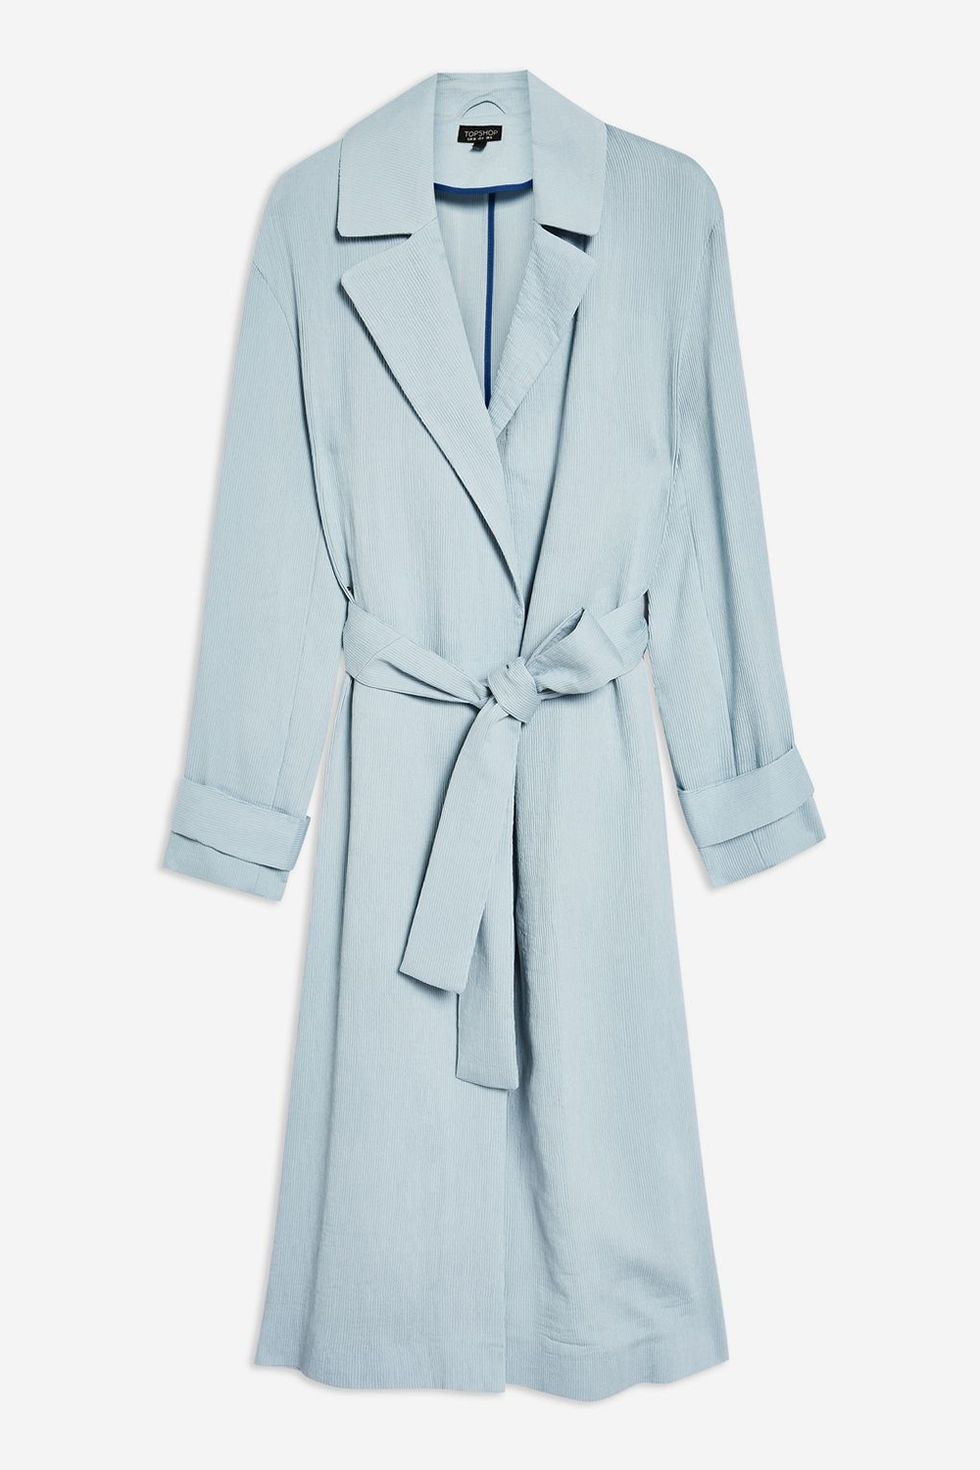 Clothing, White, Coat, Outerwear, Robe, Trench coat, Overcoat, Sleeve, Dress, Day dress, 